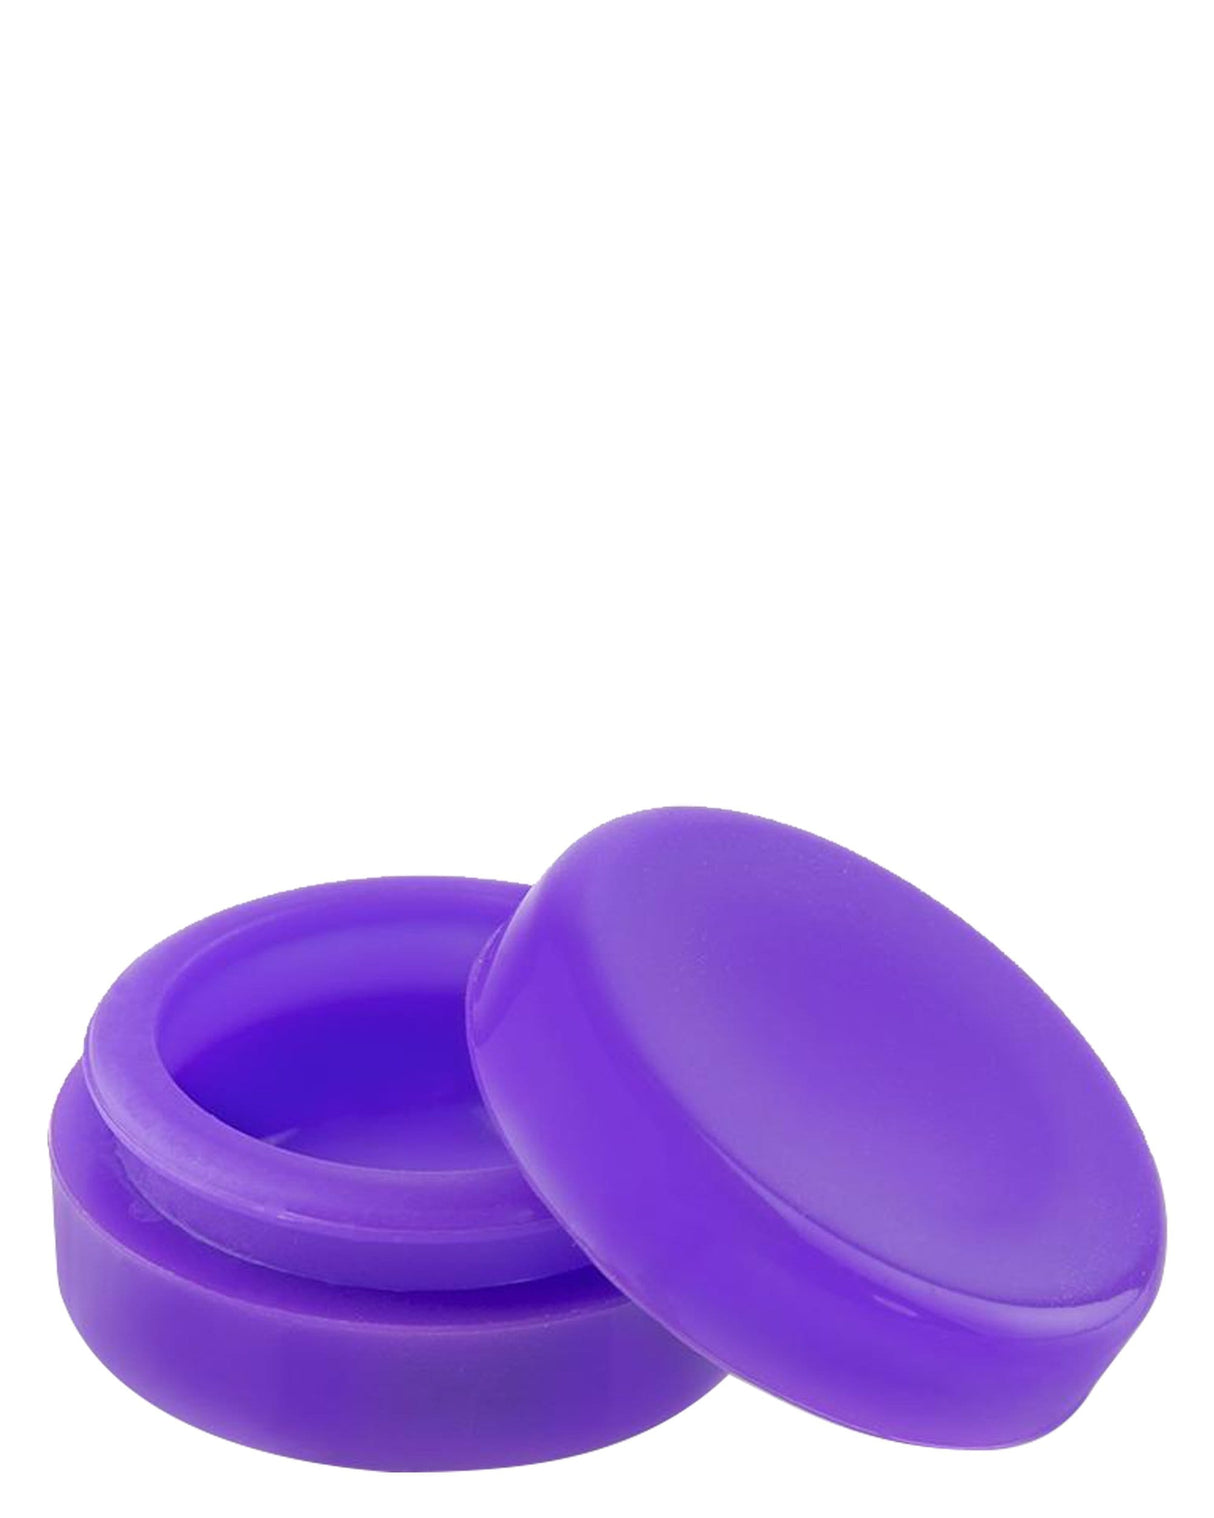 Ooze Ozone Silicone Bong in Purple, Compact and Durable with Stash Storage, Front View